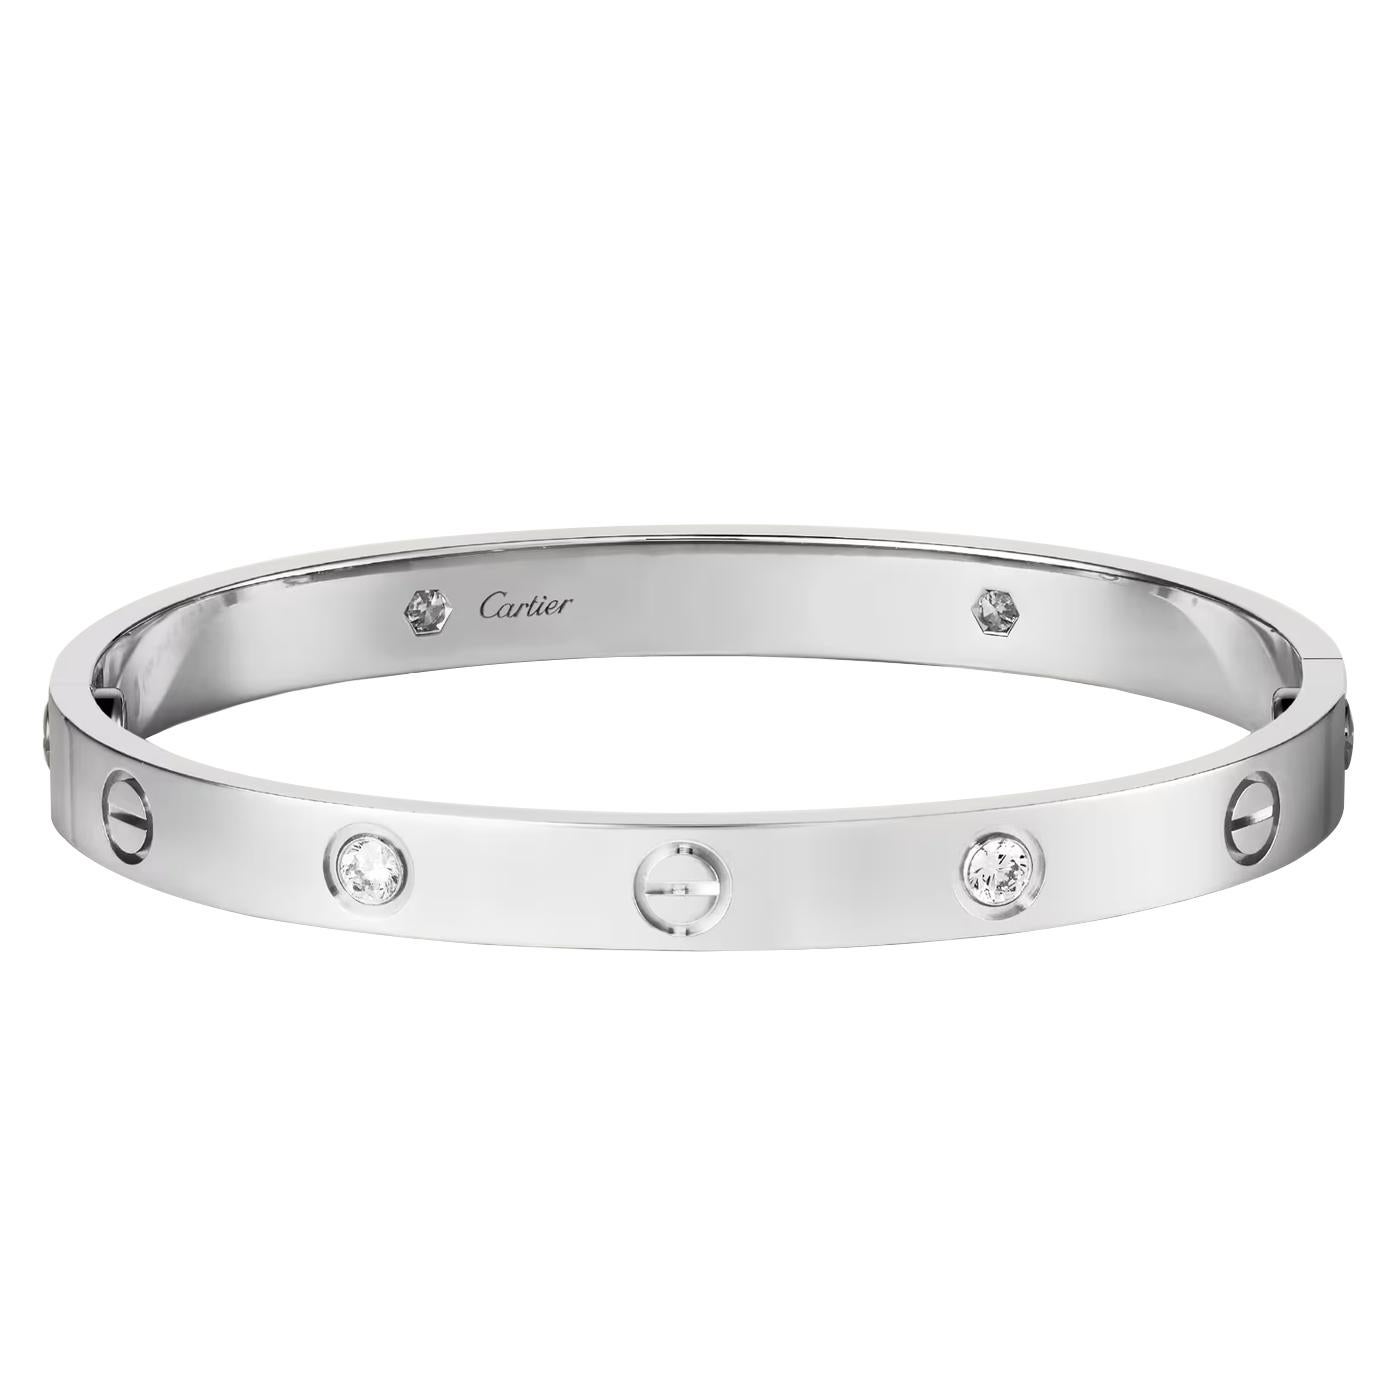 LOVE bracelet, 18K white gold (750/1000), set with 4 brilliant-cut diamonds totaling 0.42 carats. Comes with a screwdriver. Width: 6.1 mm. Created in New York in 1969, the LOVE bracelet is an icon of jewelry design: a close-fitting, oval bracelet